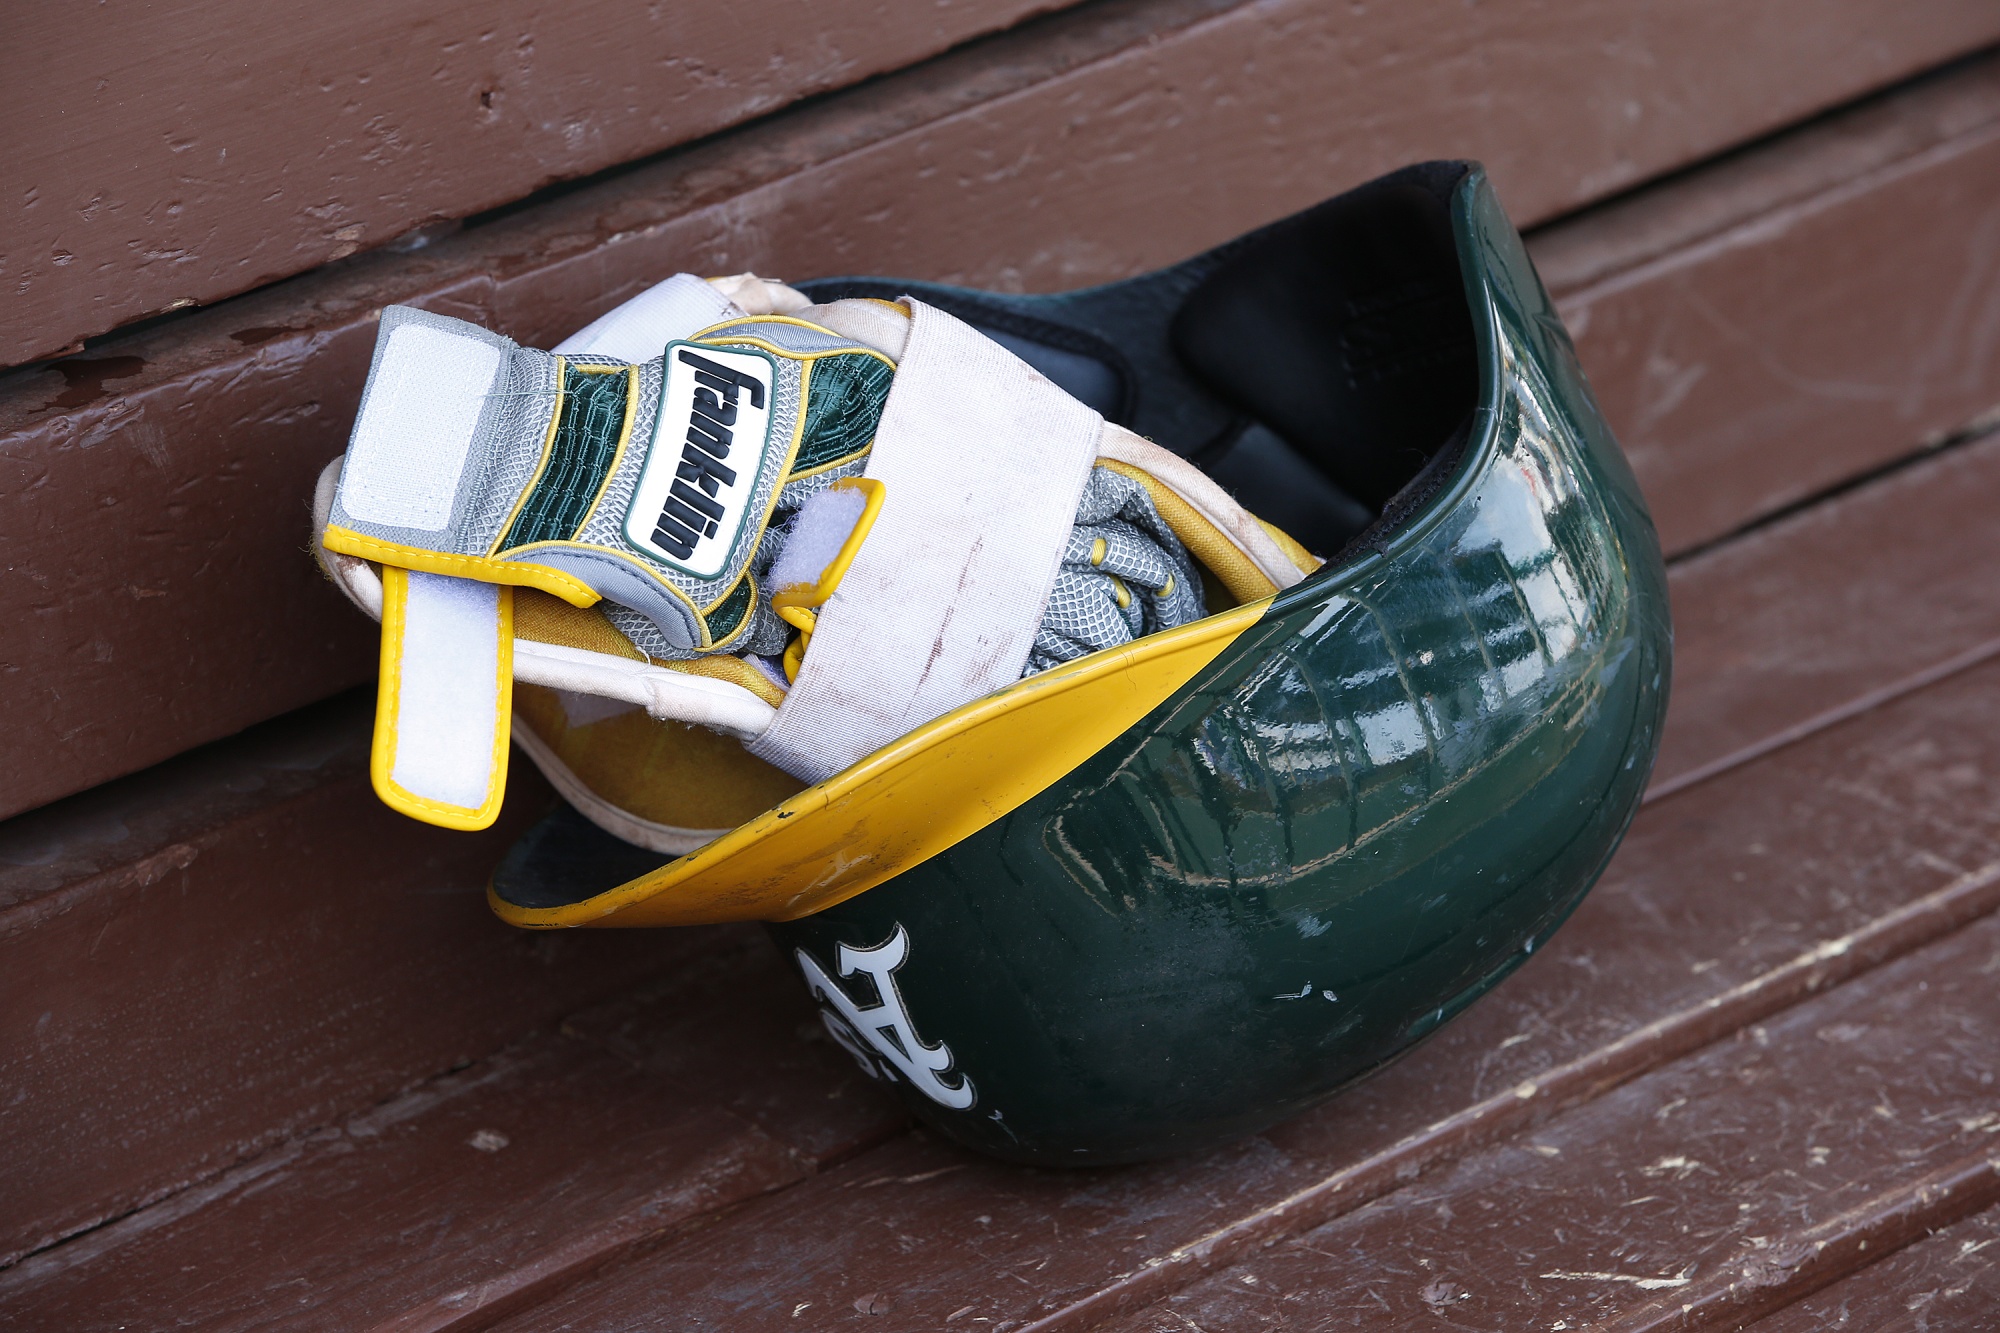 Oakland Athletics weigh in on the future of the organization